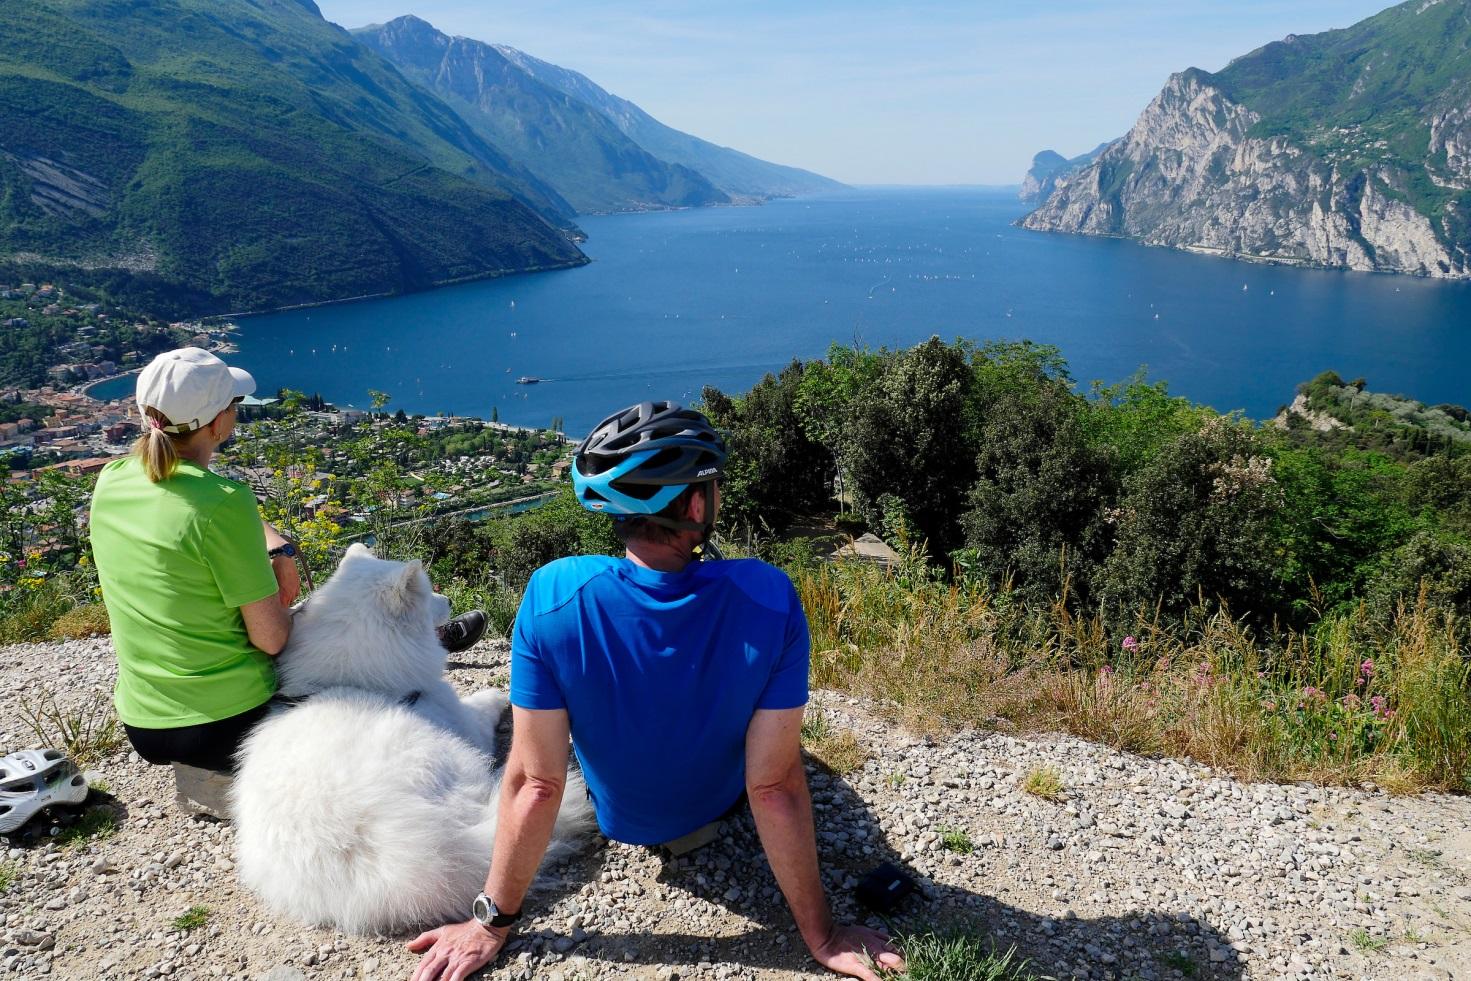 Three different cycle routes with three different levels of difficulty: there is something for everyone in Garda Trentino – image 2